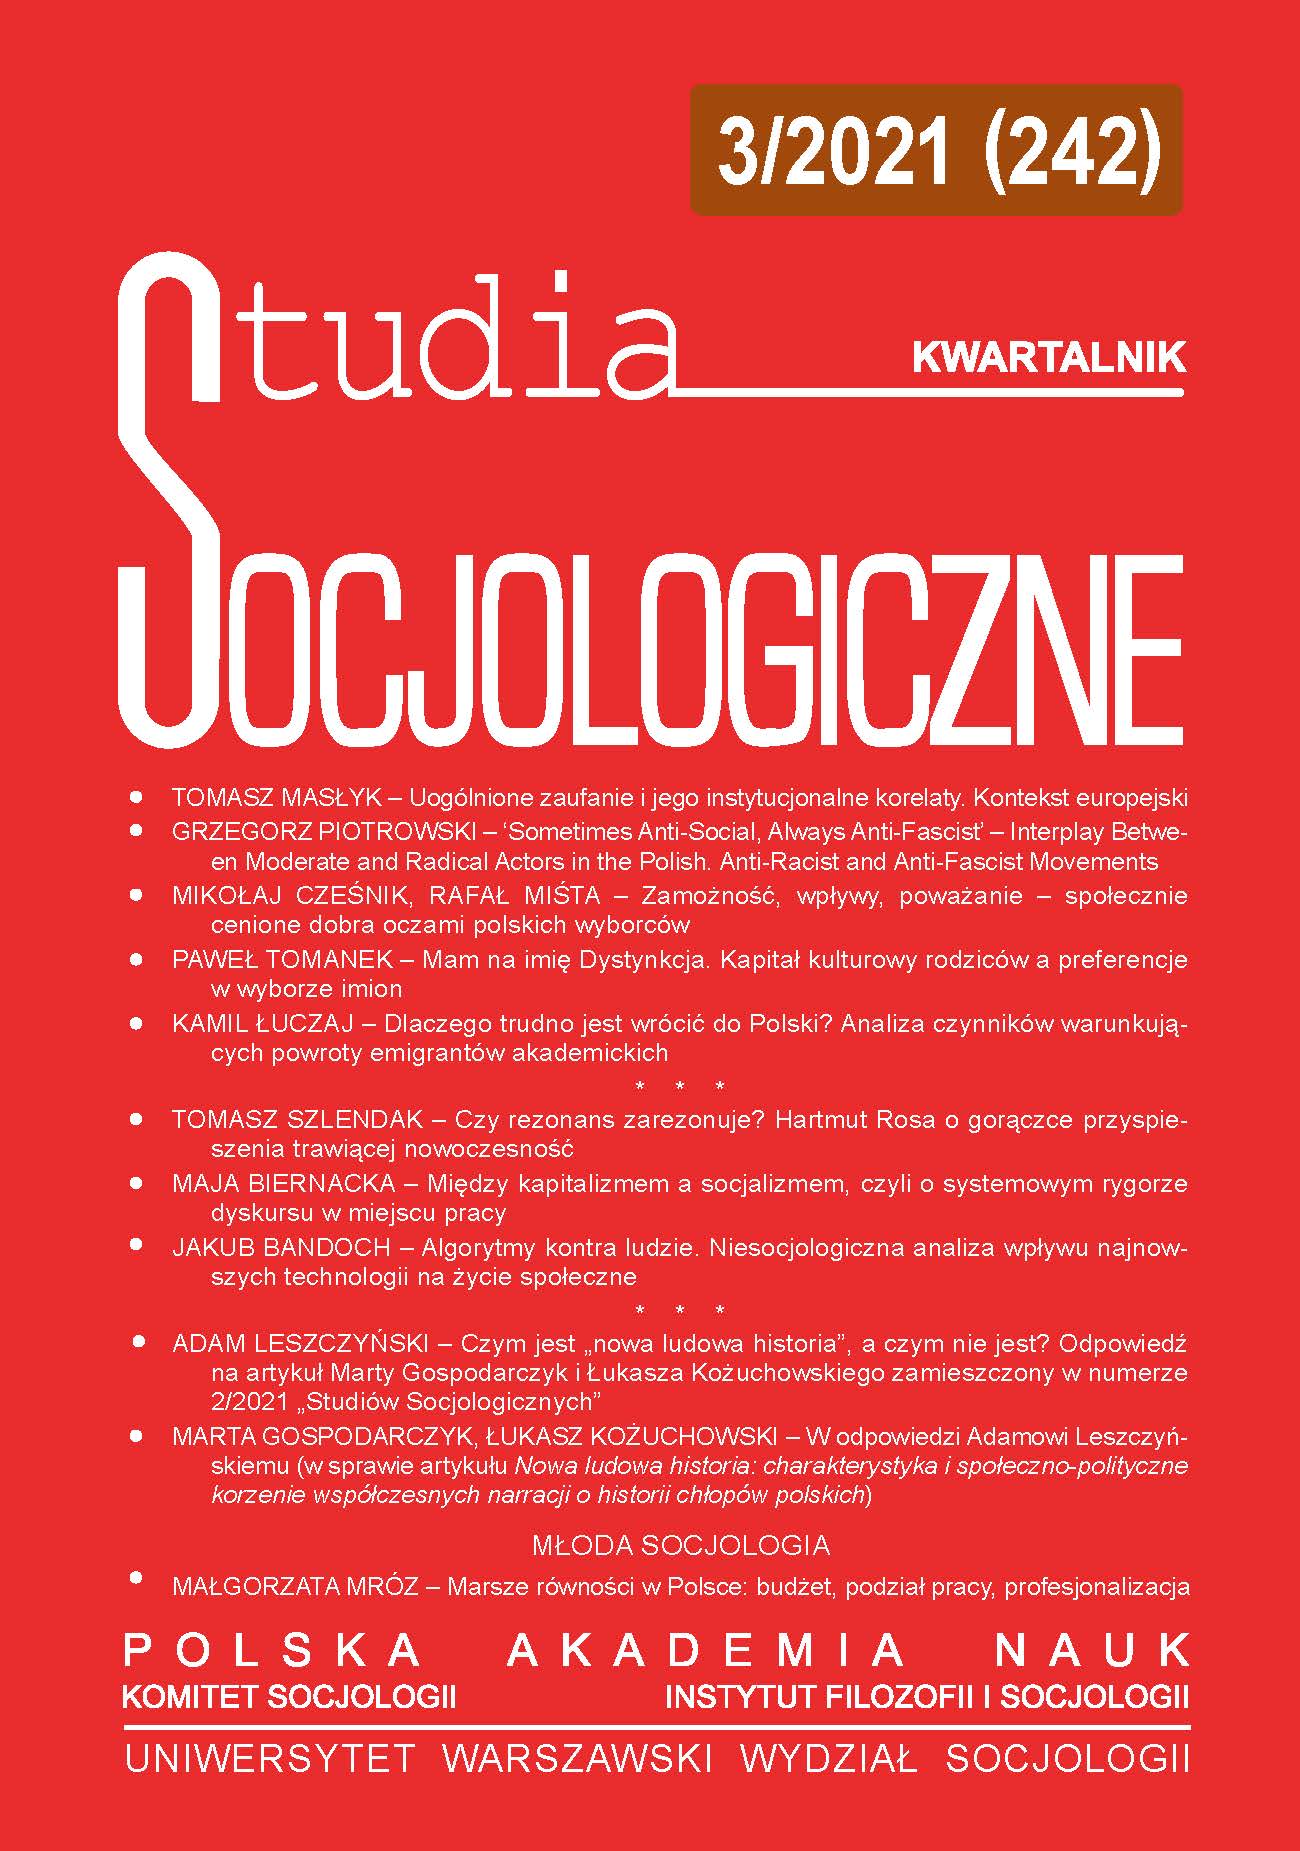 Wealth, Influence, Prestige – Socially Valued Goods from the Perspective of Polish Voters Cover Image